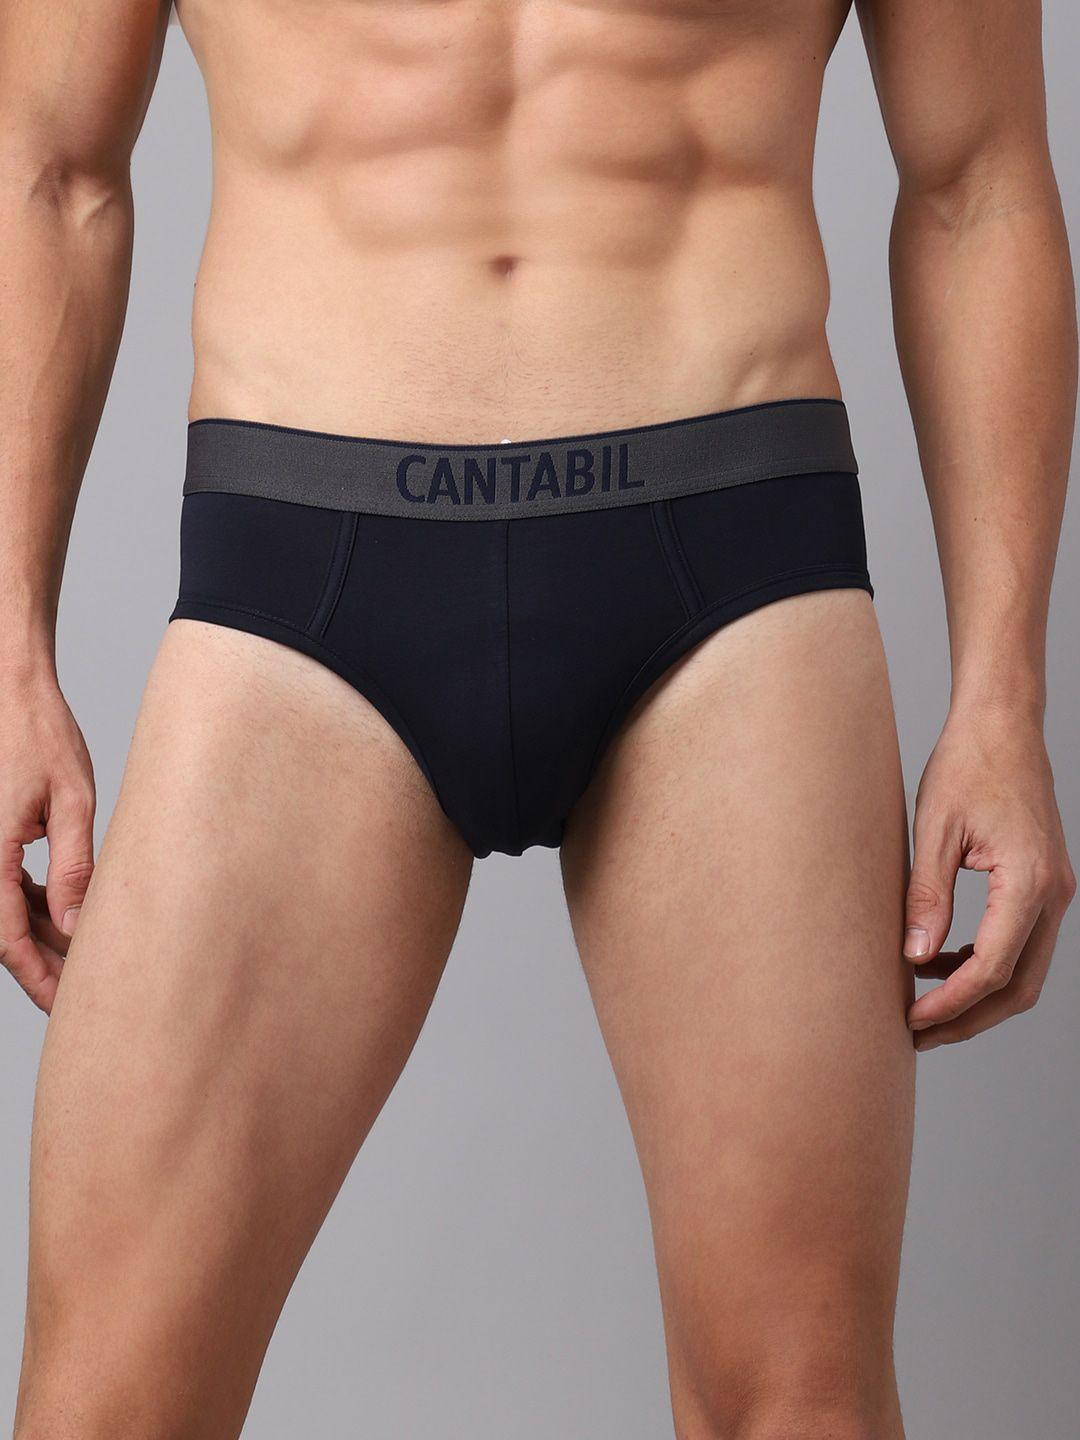 cantabil-men-pack-of-2-navy-blue-solid-basic-briefs